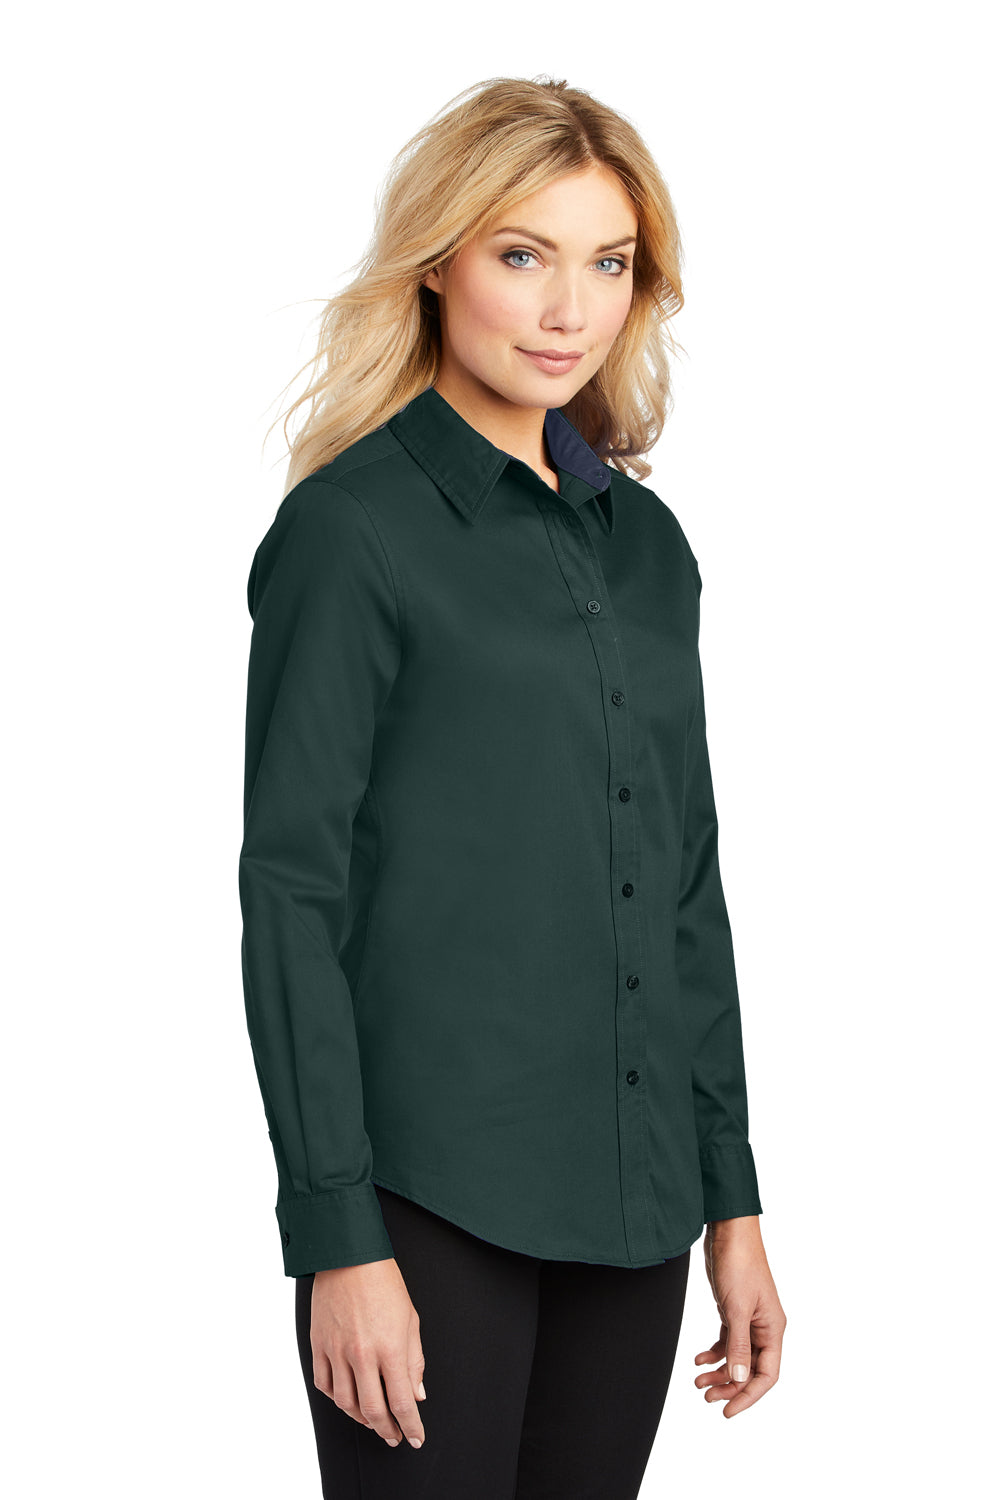 Port Authority L608 Womens Easy Care Wrinkle Resistant Long Sleeve Button Down Shirt Dark Green 3Q